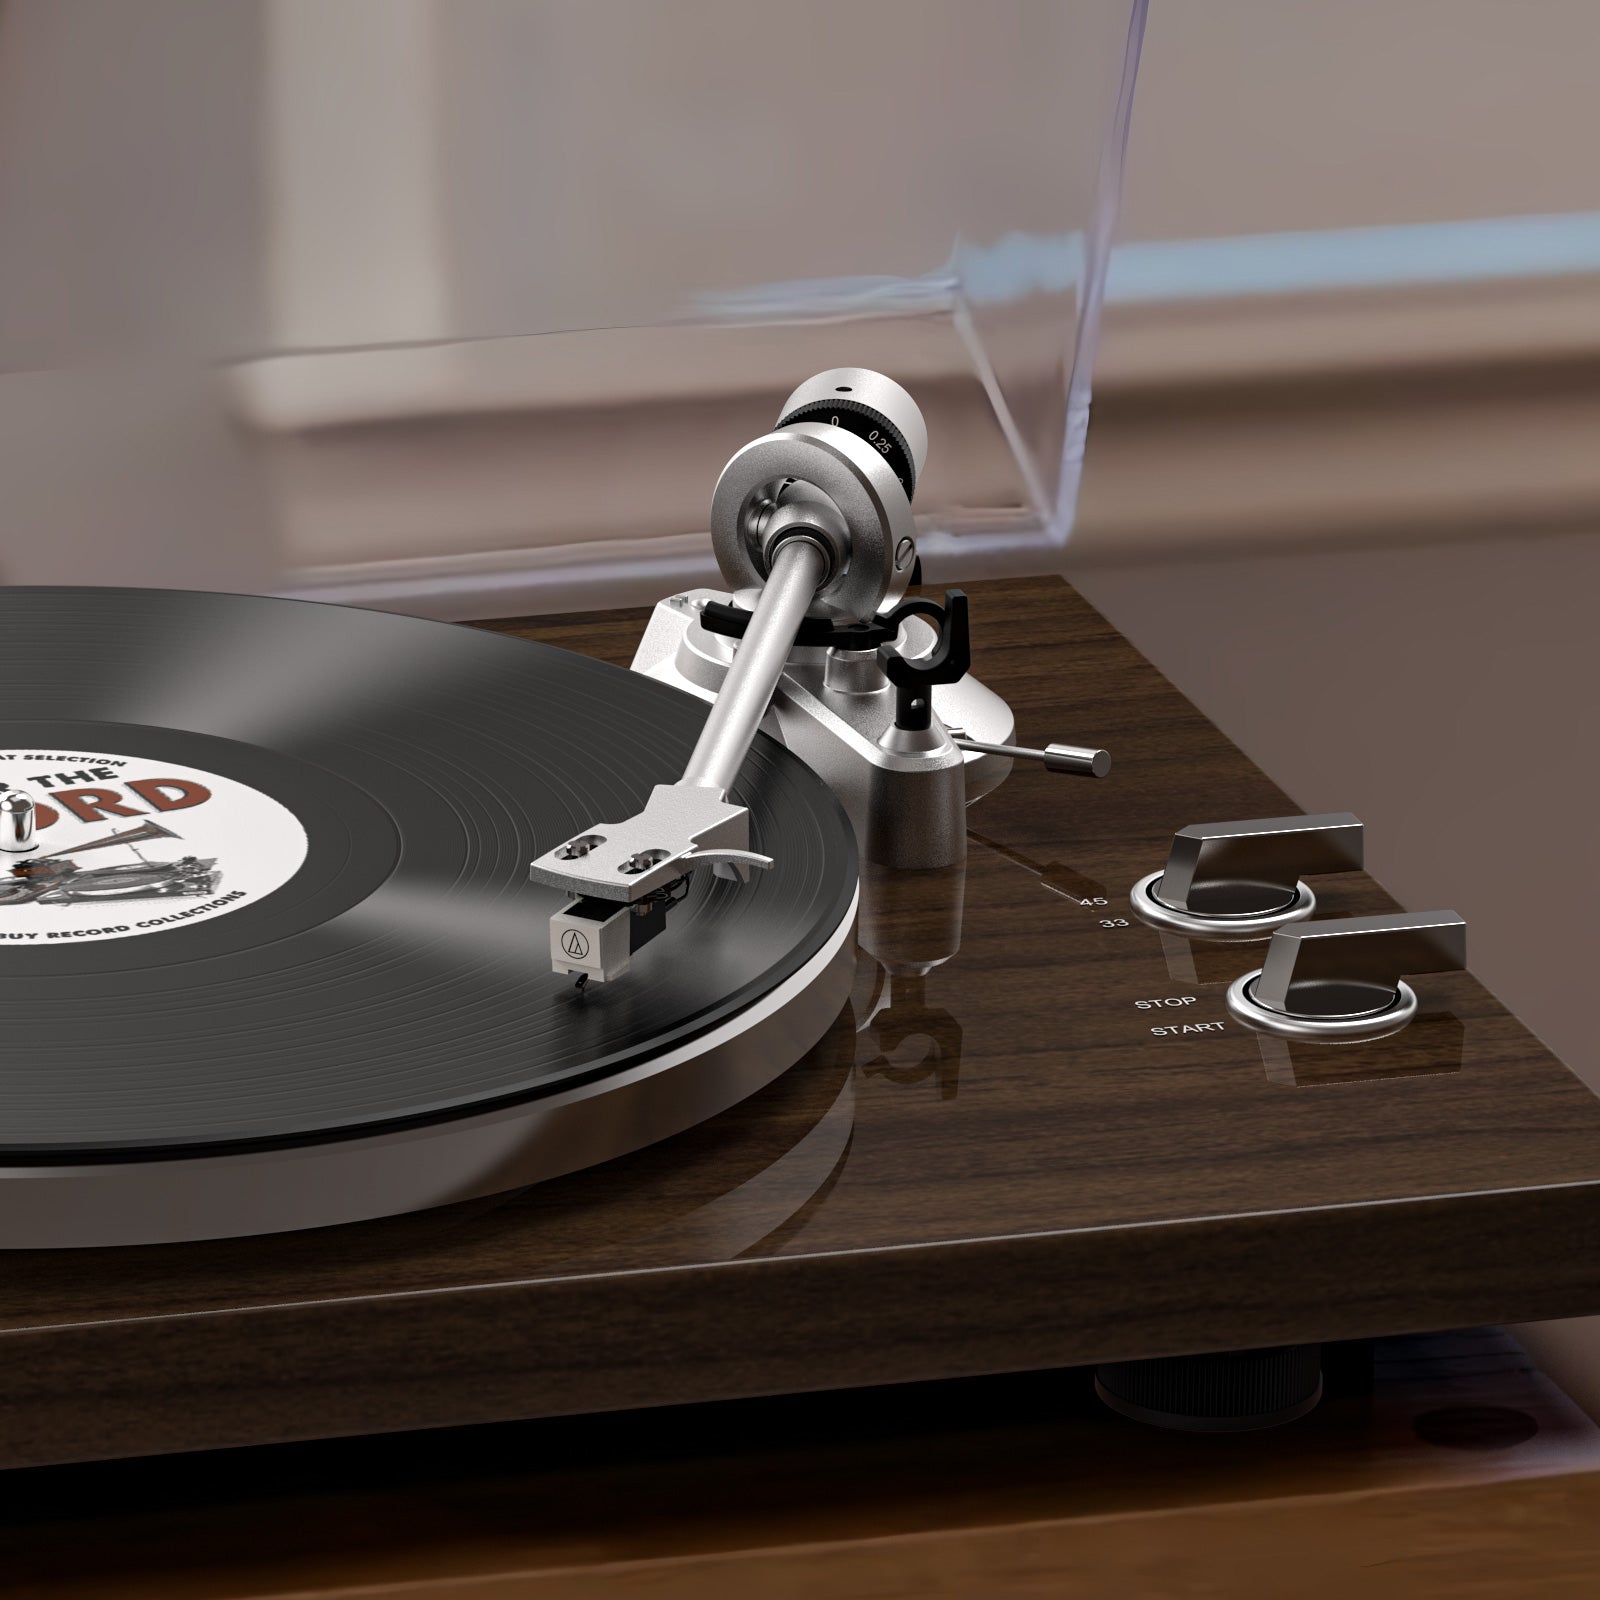 HQKZ-006 the Classic Bluetooth Vinyl Turntable with High Fidelity Sound